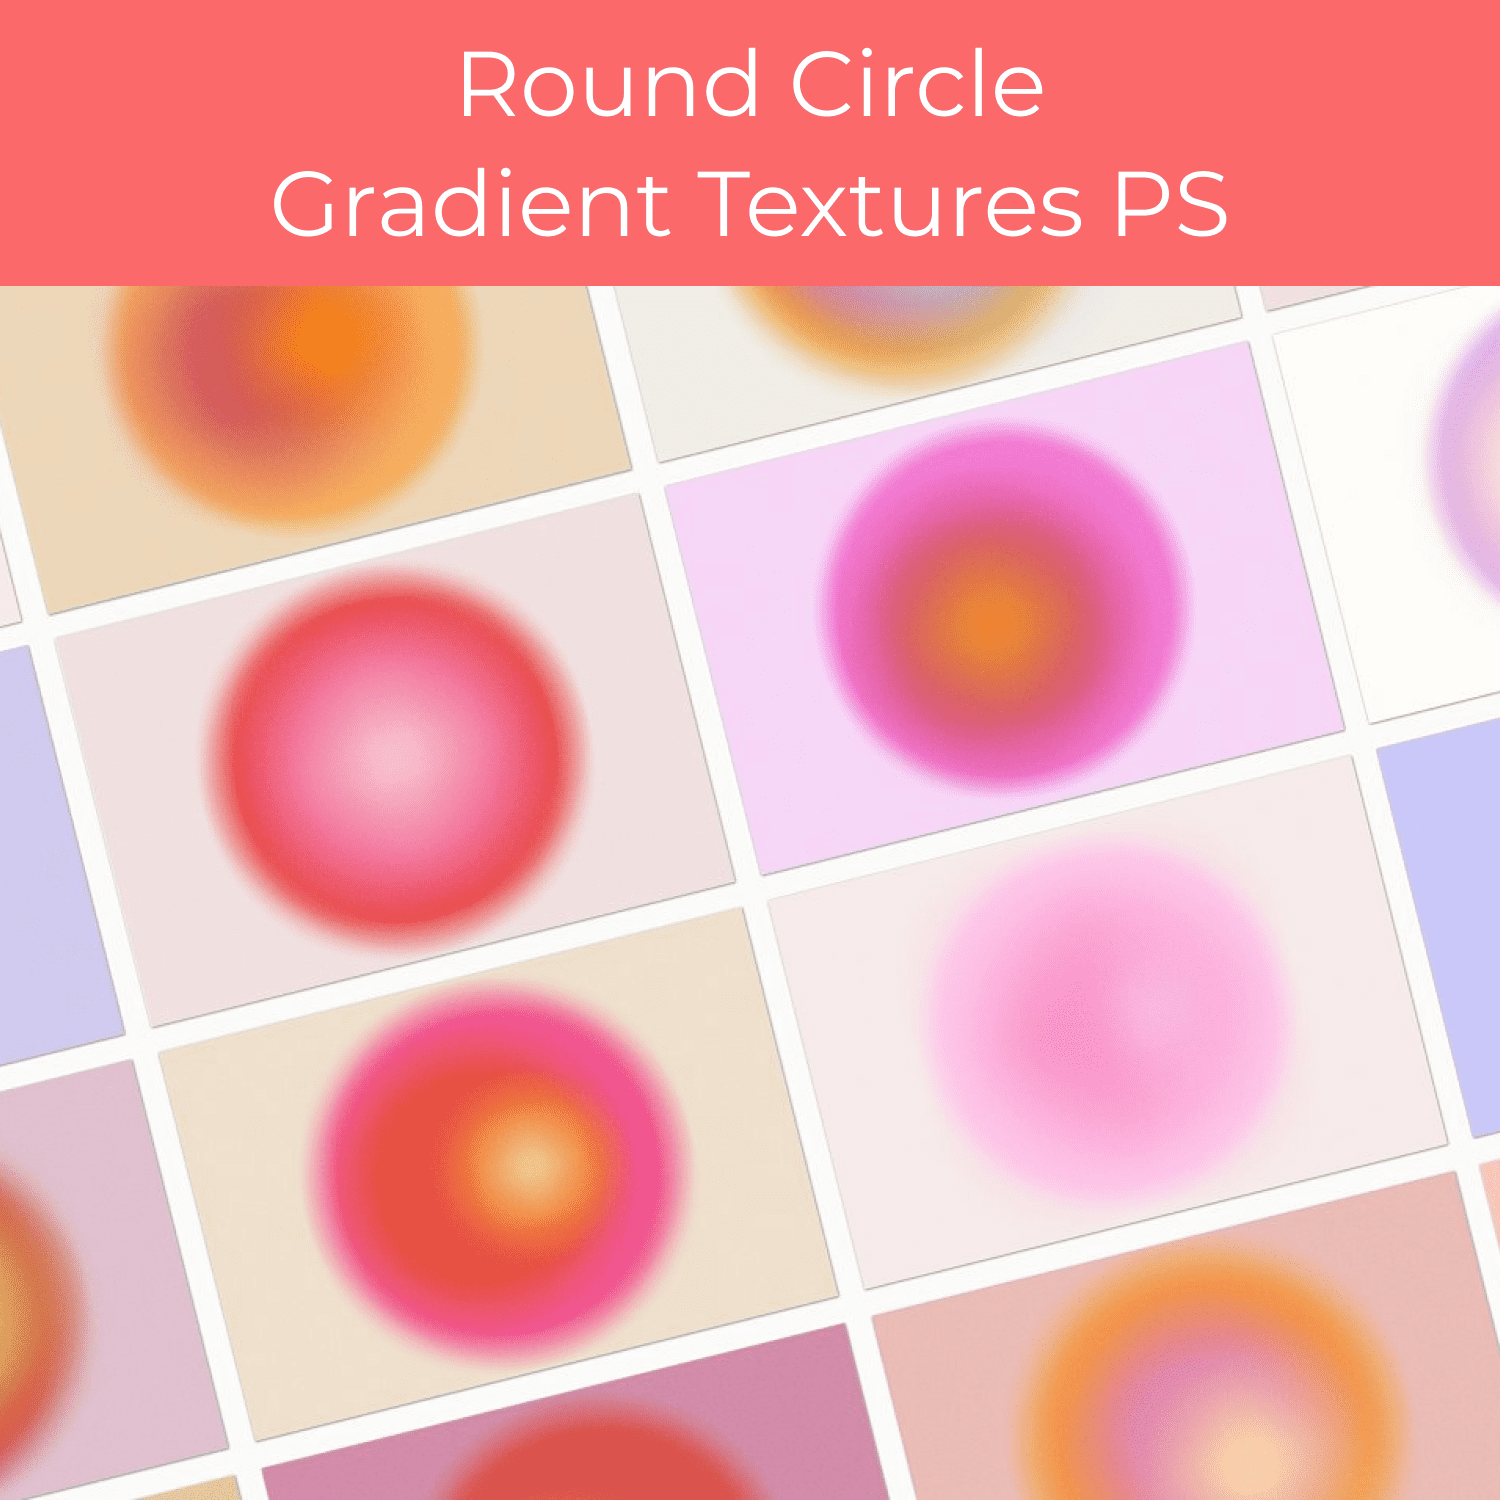 Round Circle Gradient Textures PS cover.